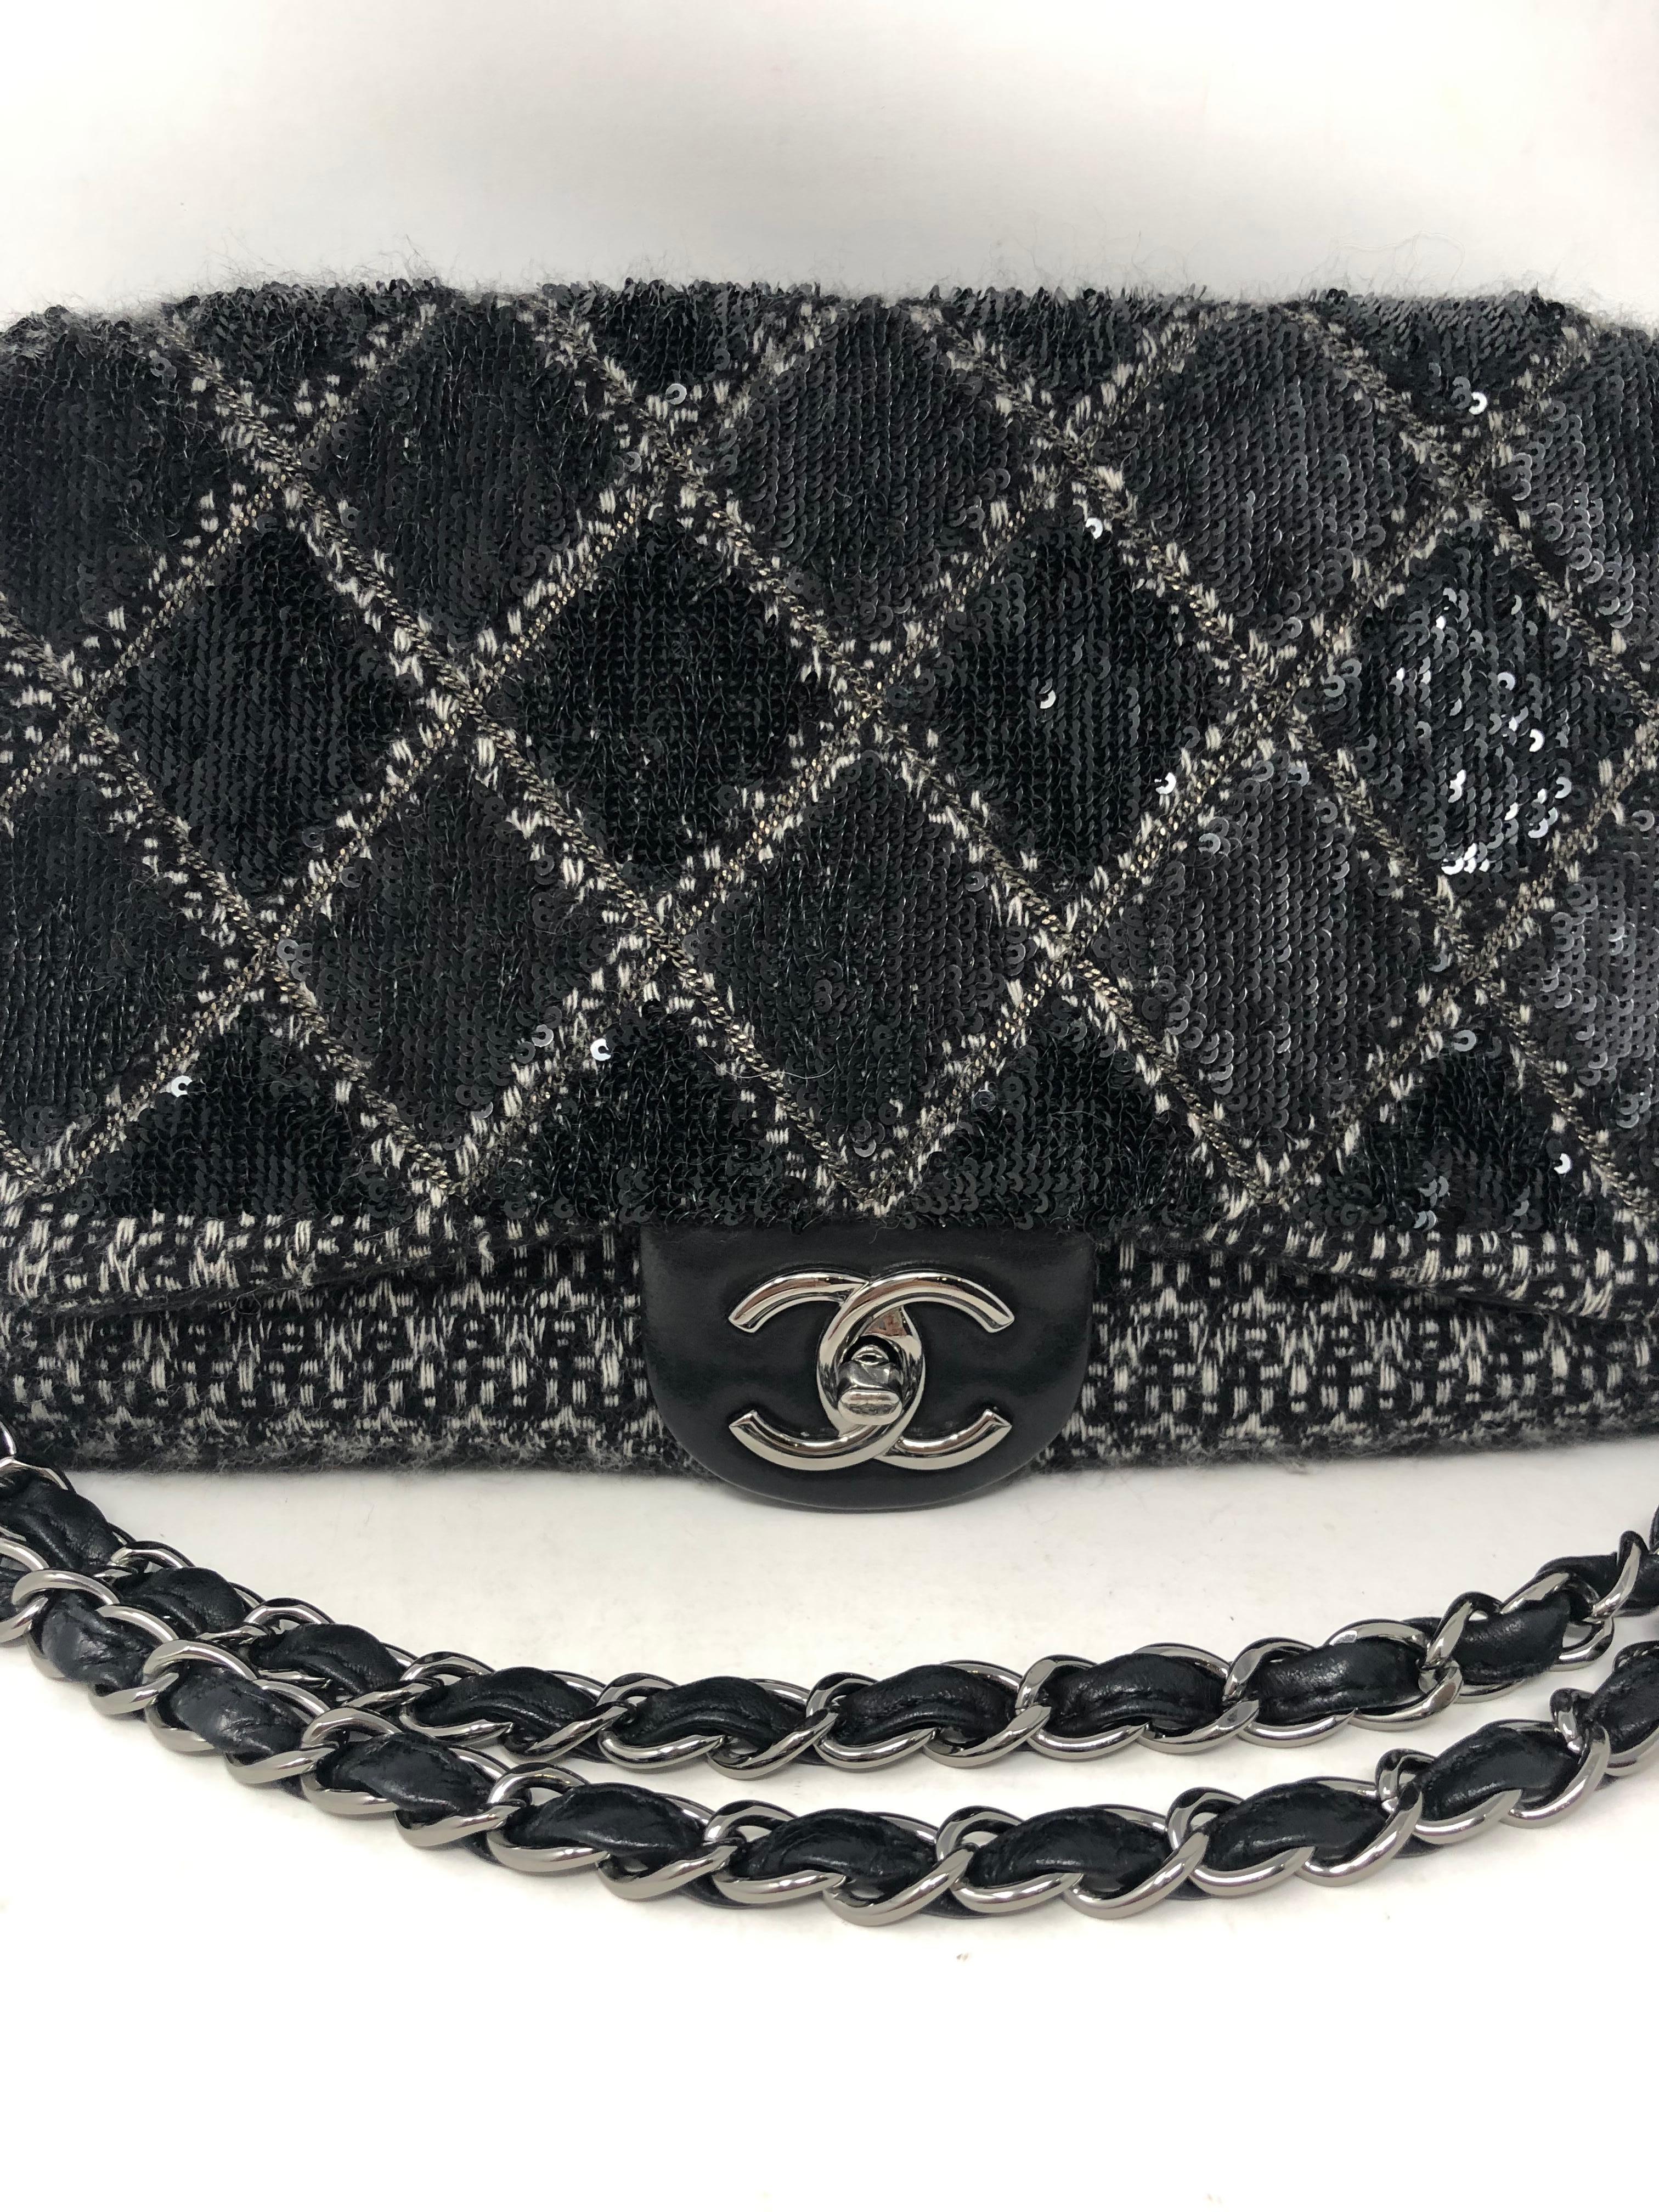 Chanel Black Jumbo Tweed Bag with Silver Hardware. Black diagonal tweed and leather Chanel bag. Excellent condition. Bag can be worn longer or doubled on the shoulder. Unique pattern and look. Leather interior. Guarnteed authentic. 